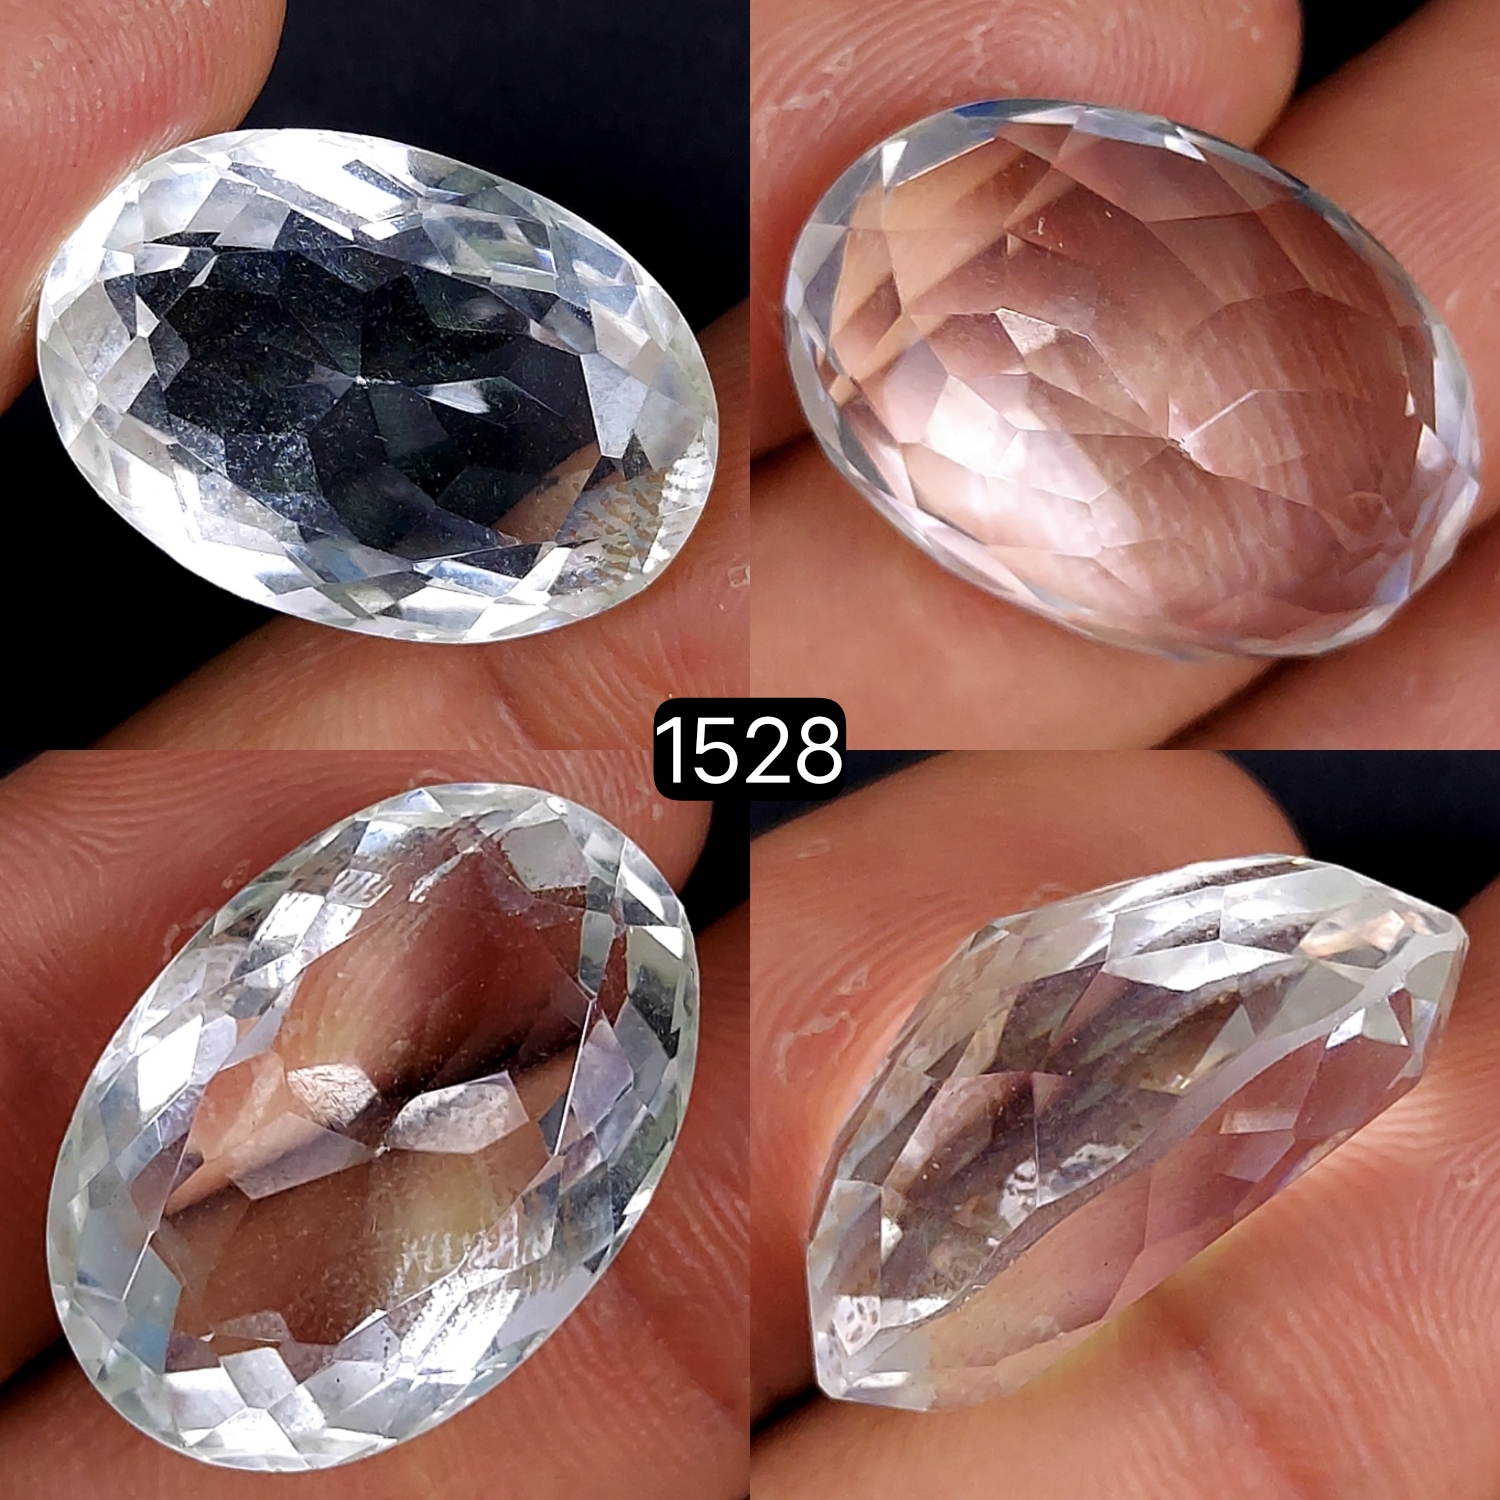 1Pc 29Cts Natural Crystal Quartz Faceted Cabochon Gemstone Oval Shape Crystal 24x16mm#1528